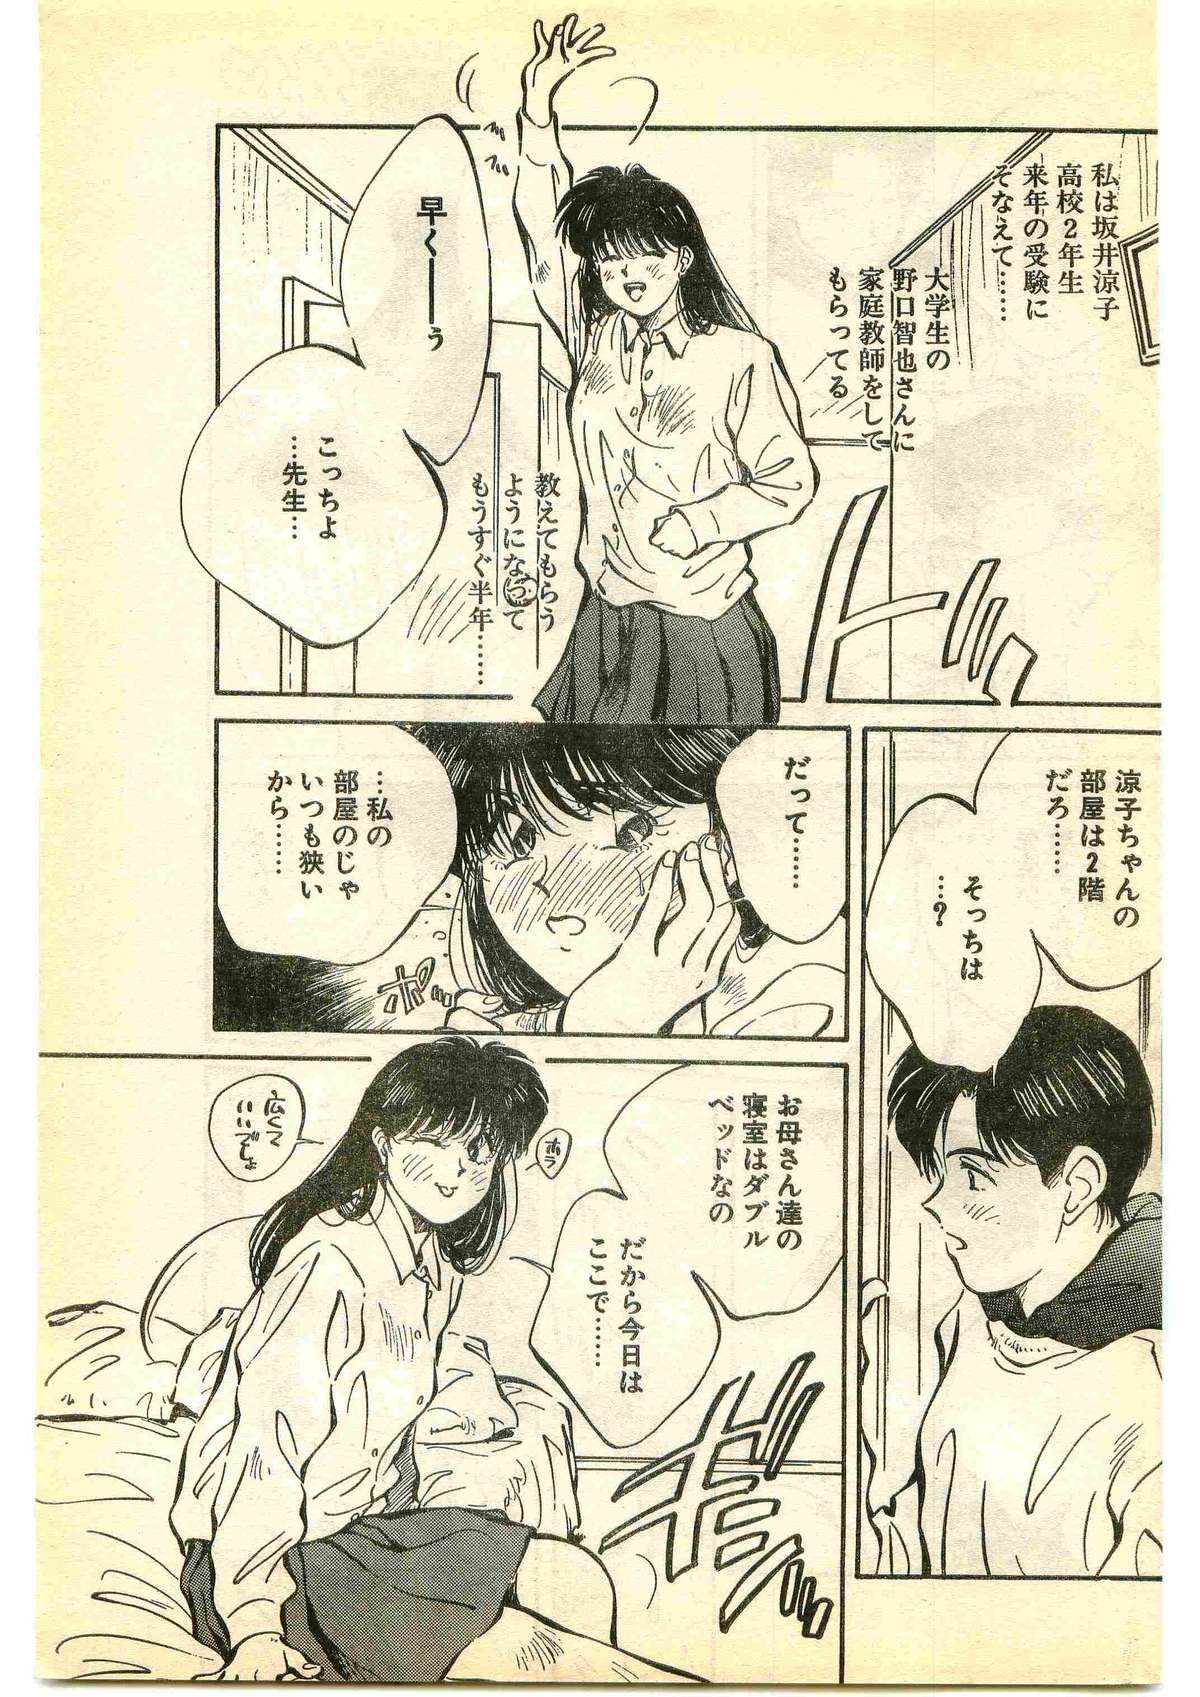 COMIC Papipo Gaiden 1995-01 page 25 full